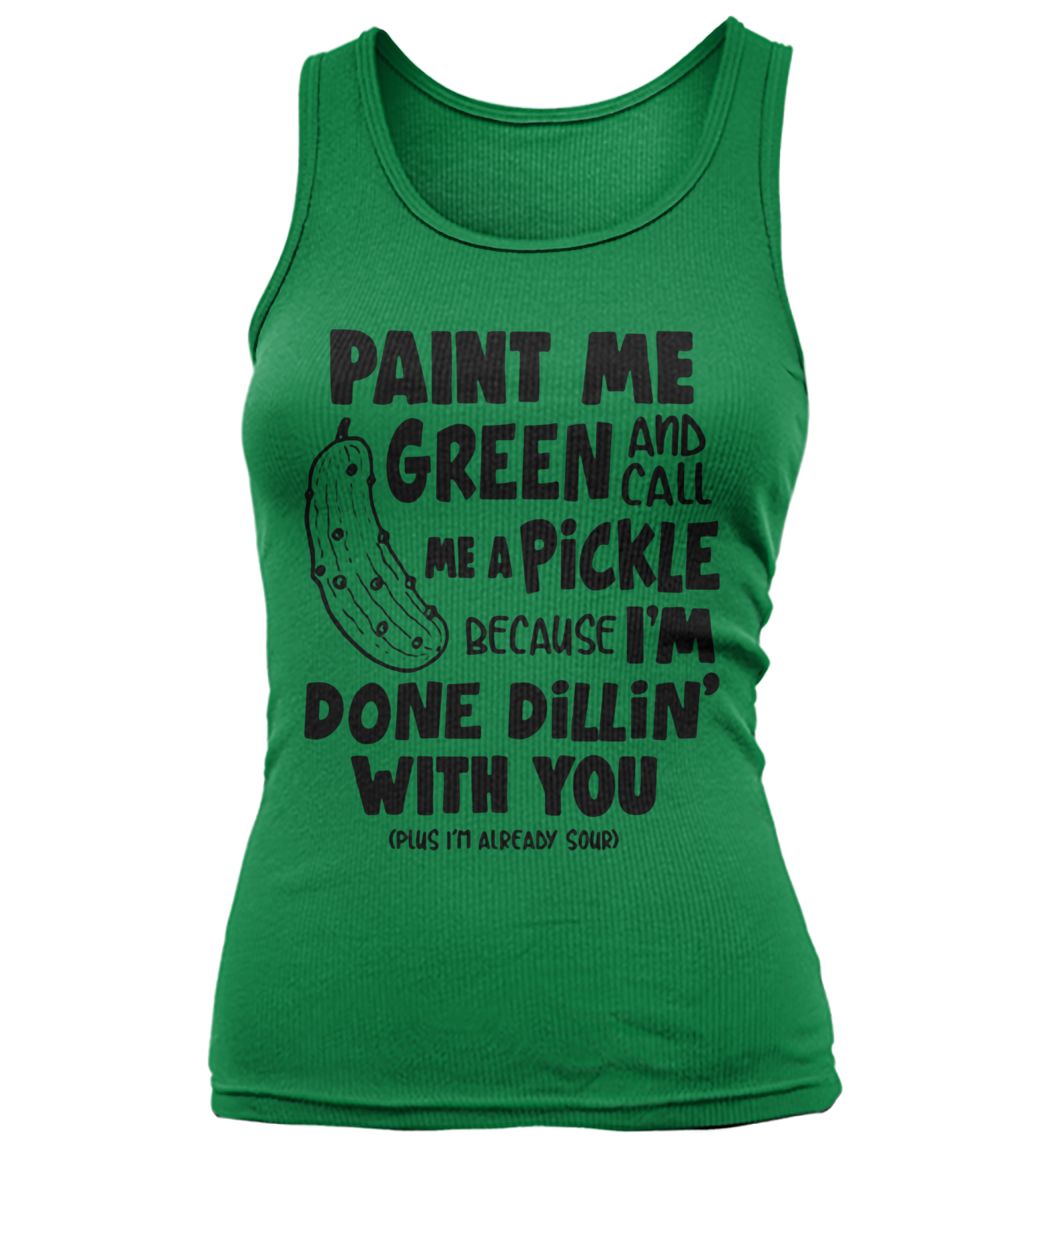 Paint me green and call me a pickle women's tank top